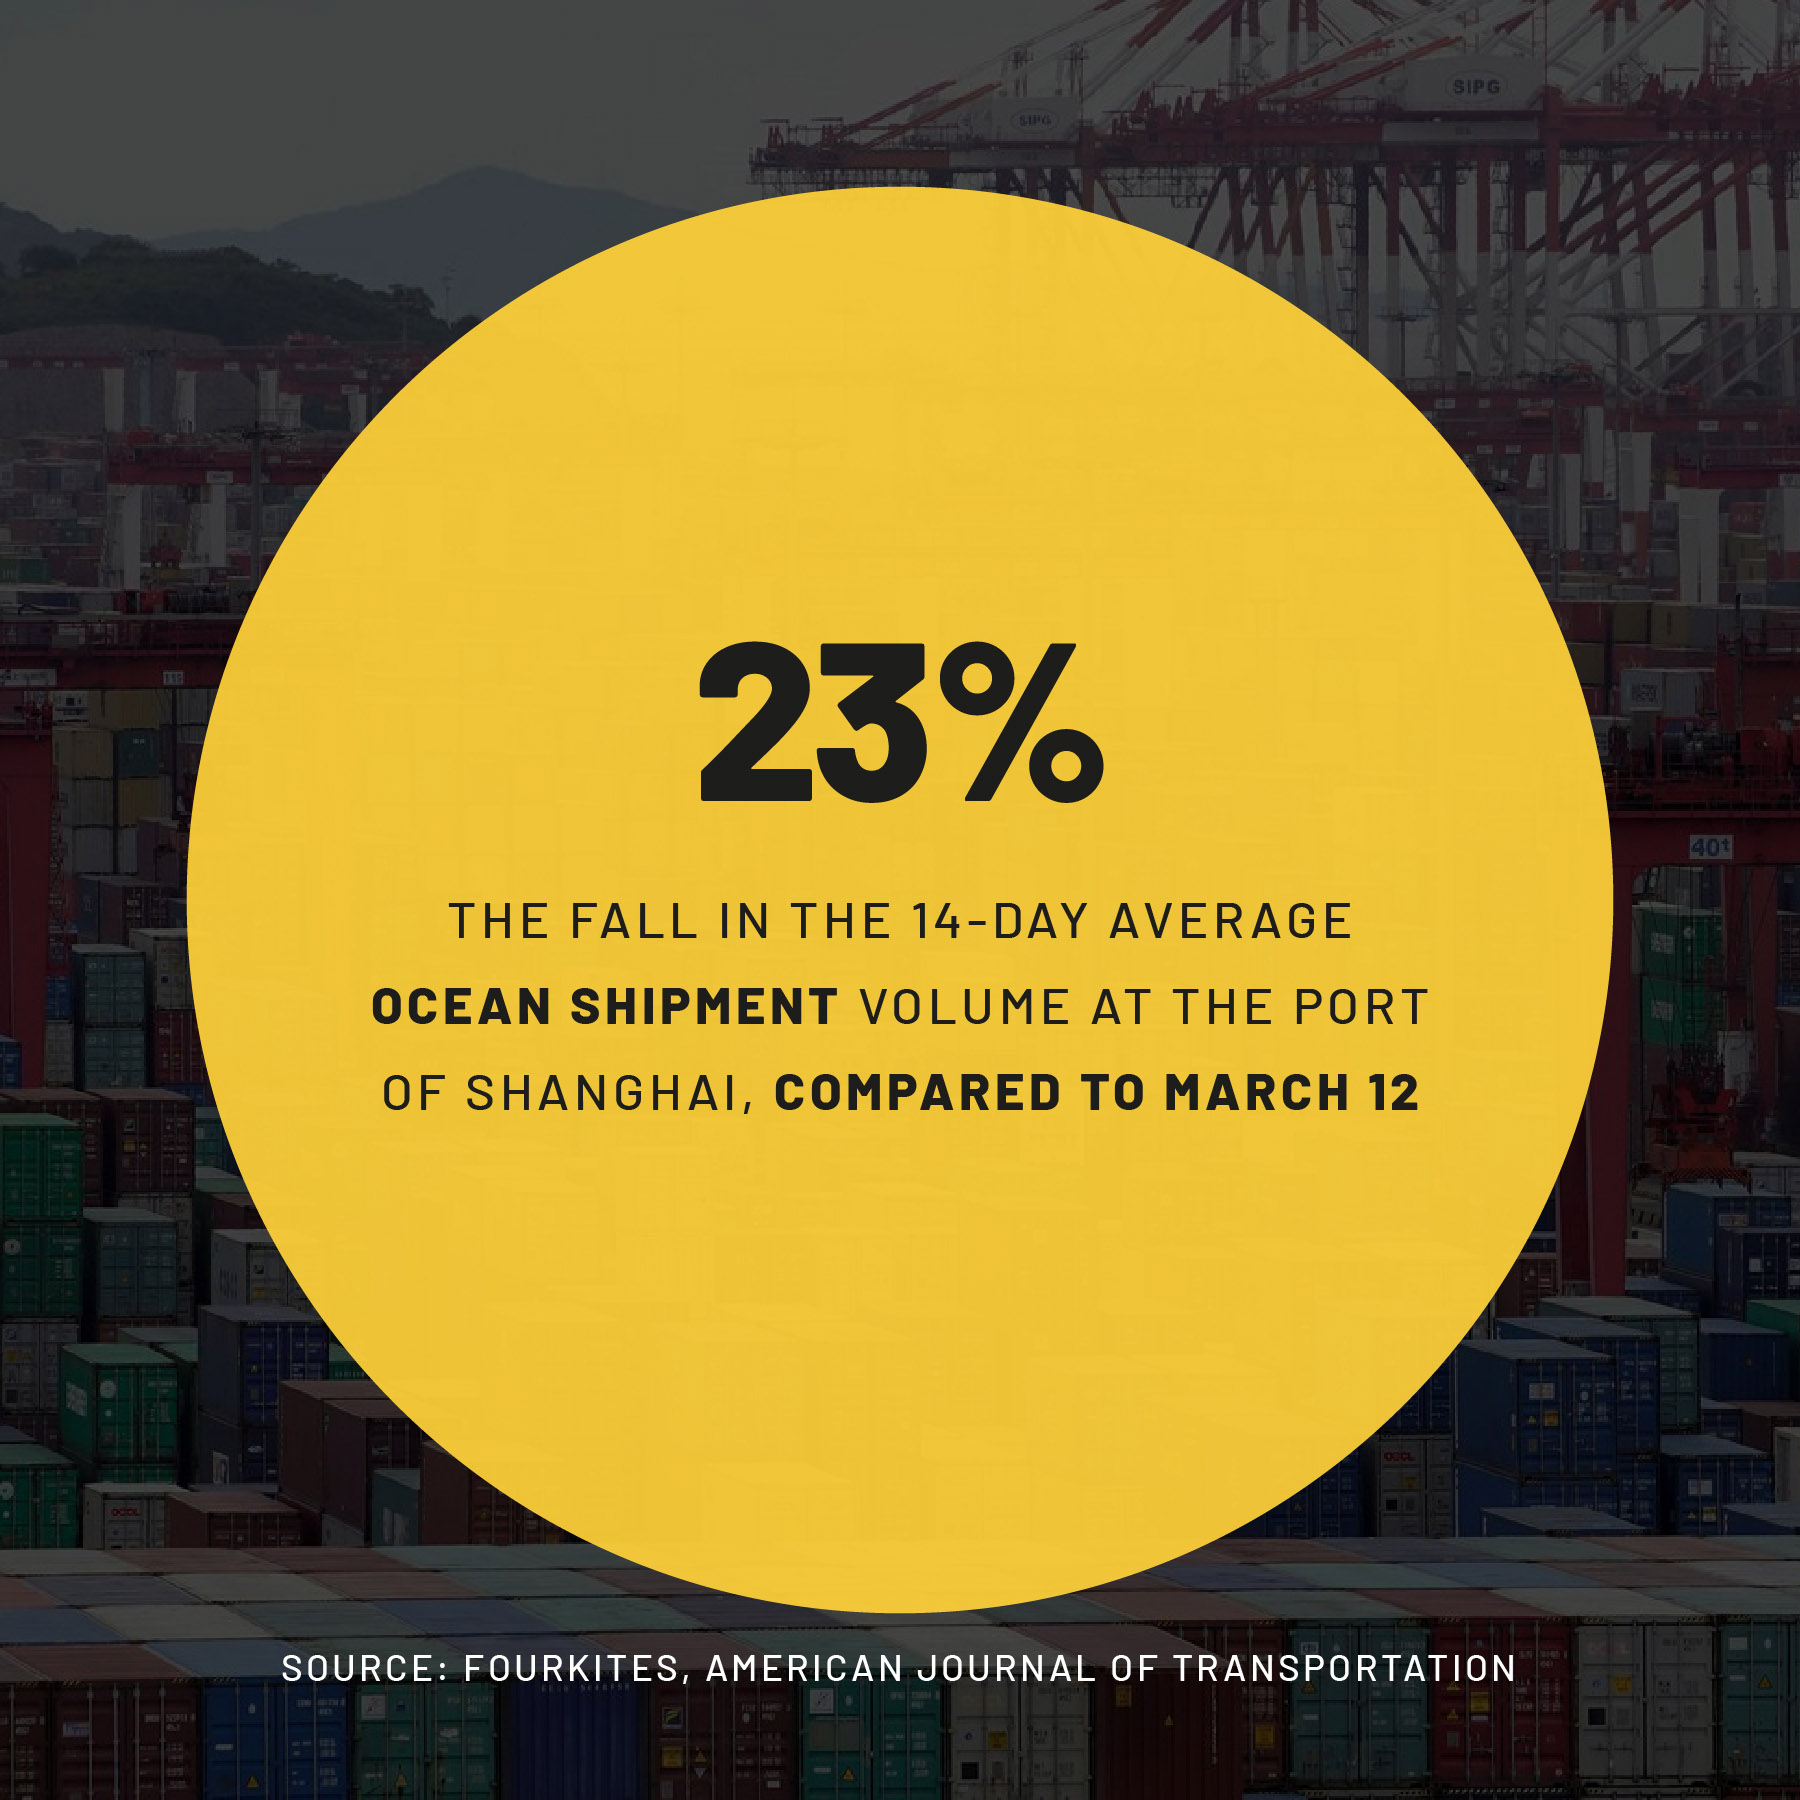 Infographic on the fall in the 14-day average ocean shipment volume at the Port of Shanghai